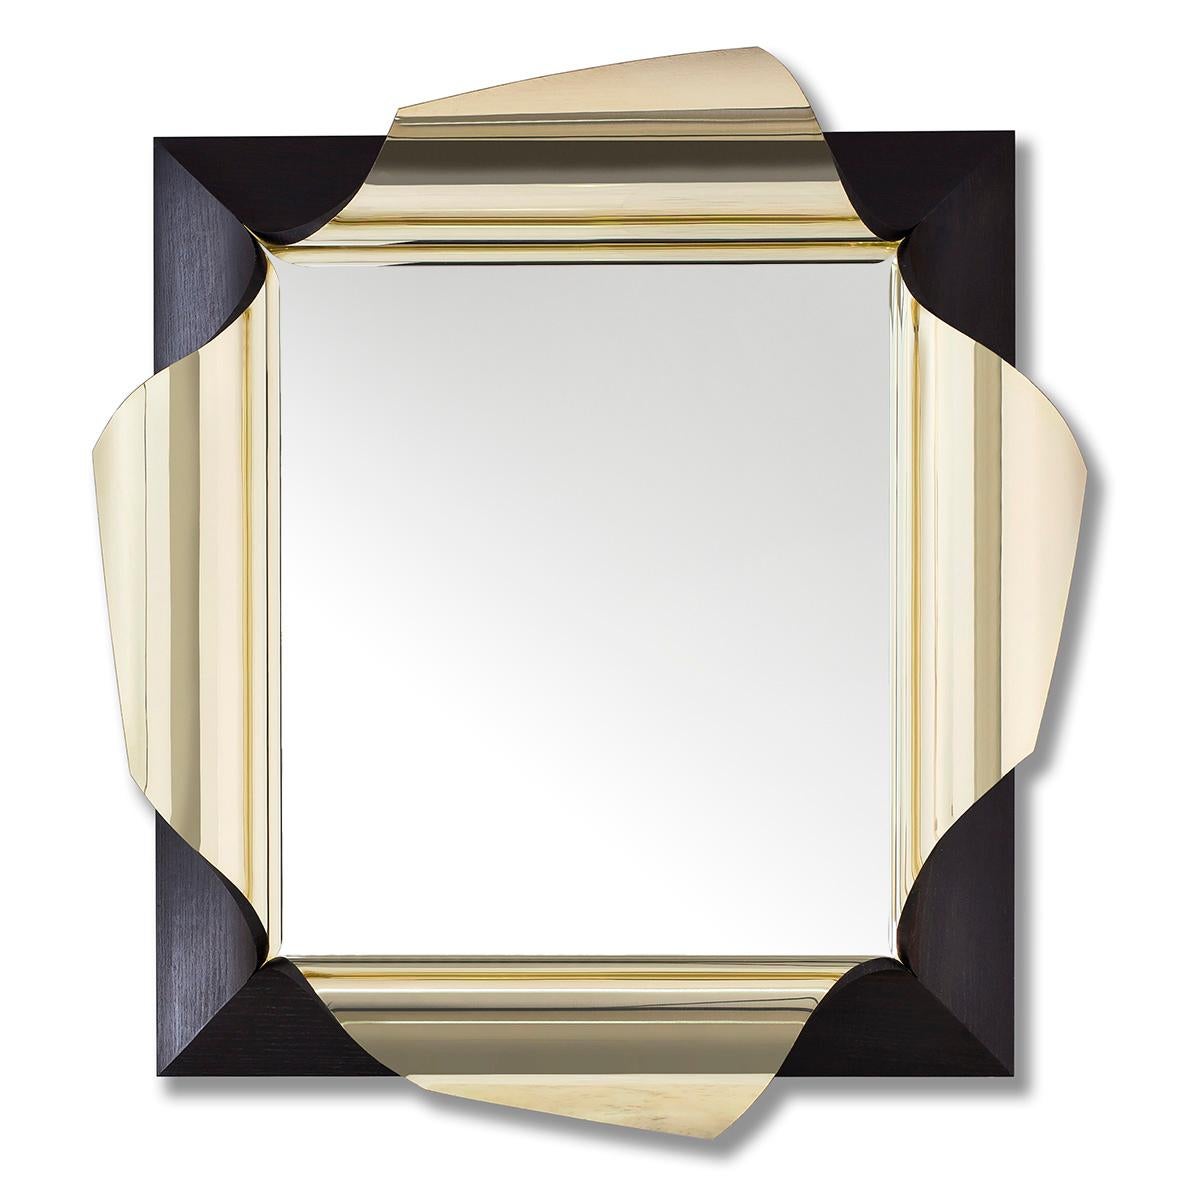 This mirror takes its cue from the Surrealist art movement and in particular Salvador Dalí. The paintings of many Surrealist artists were akin to windows into a strange world beyond waking life, often with an element of surprise and unexpected